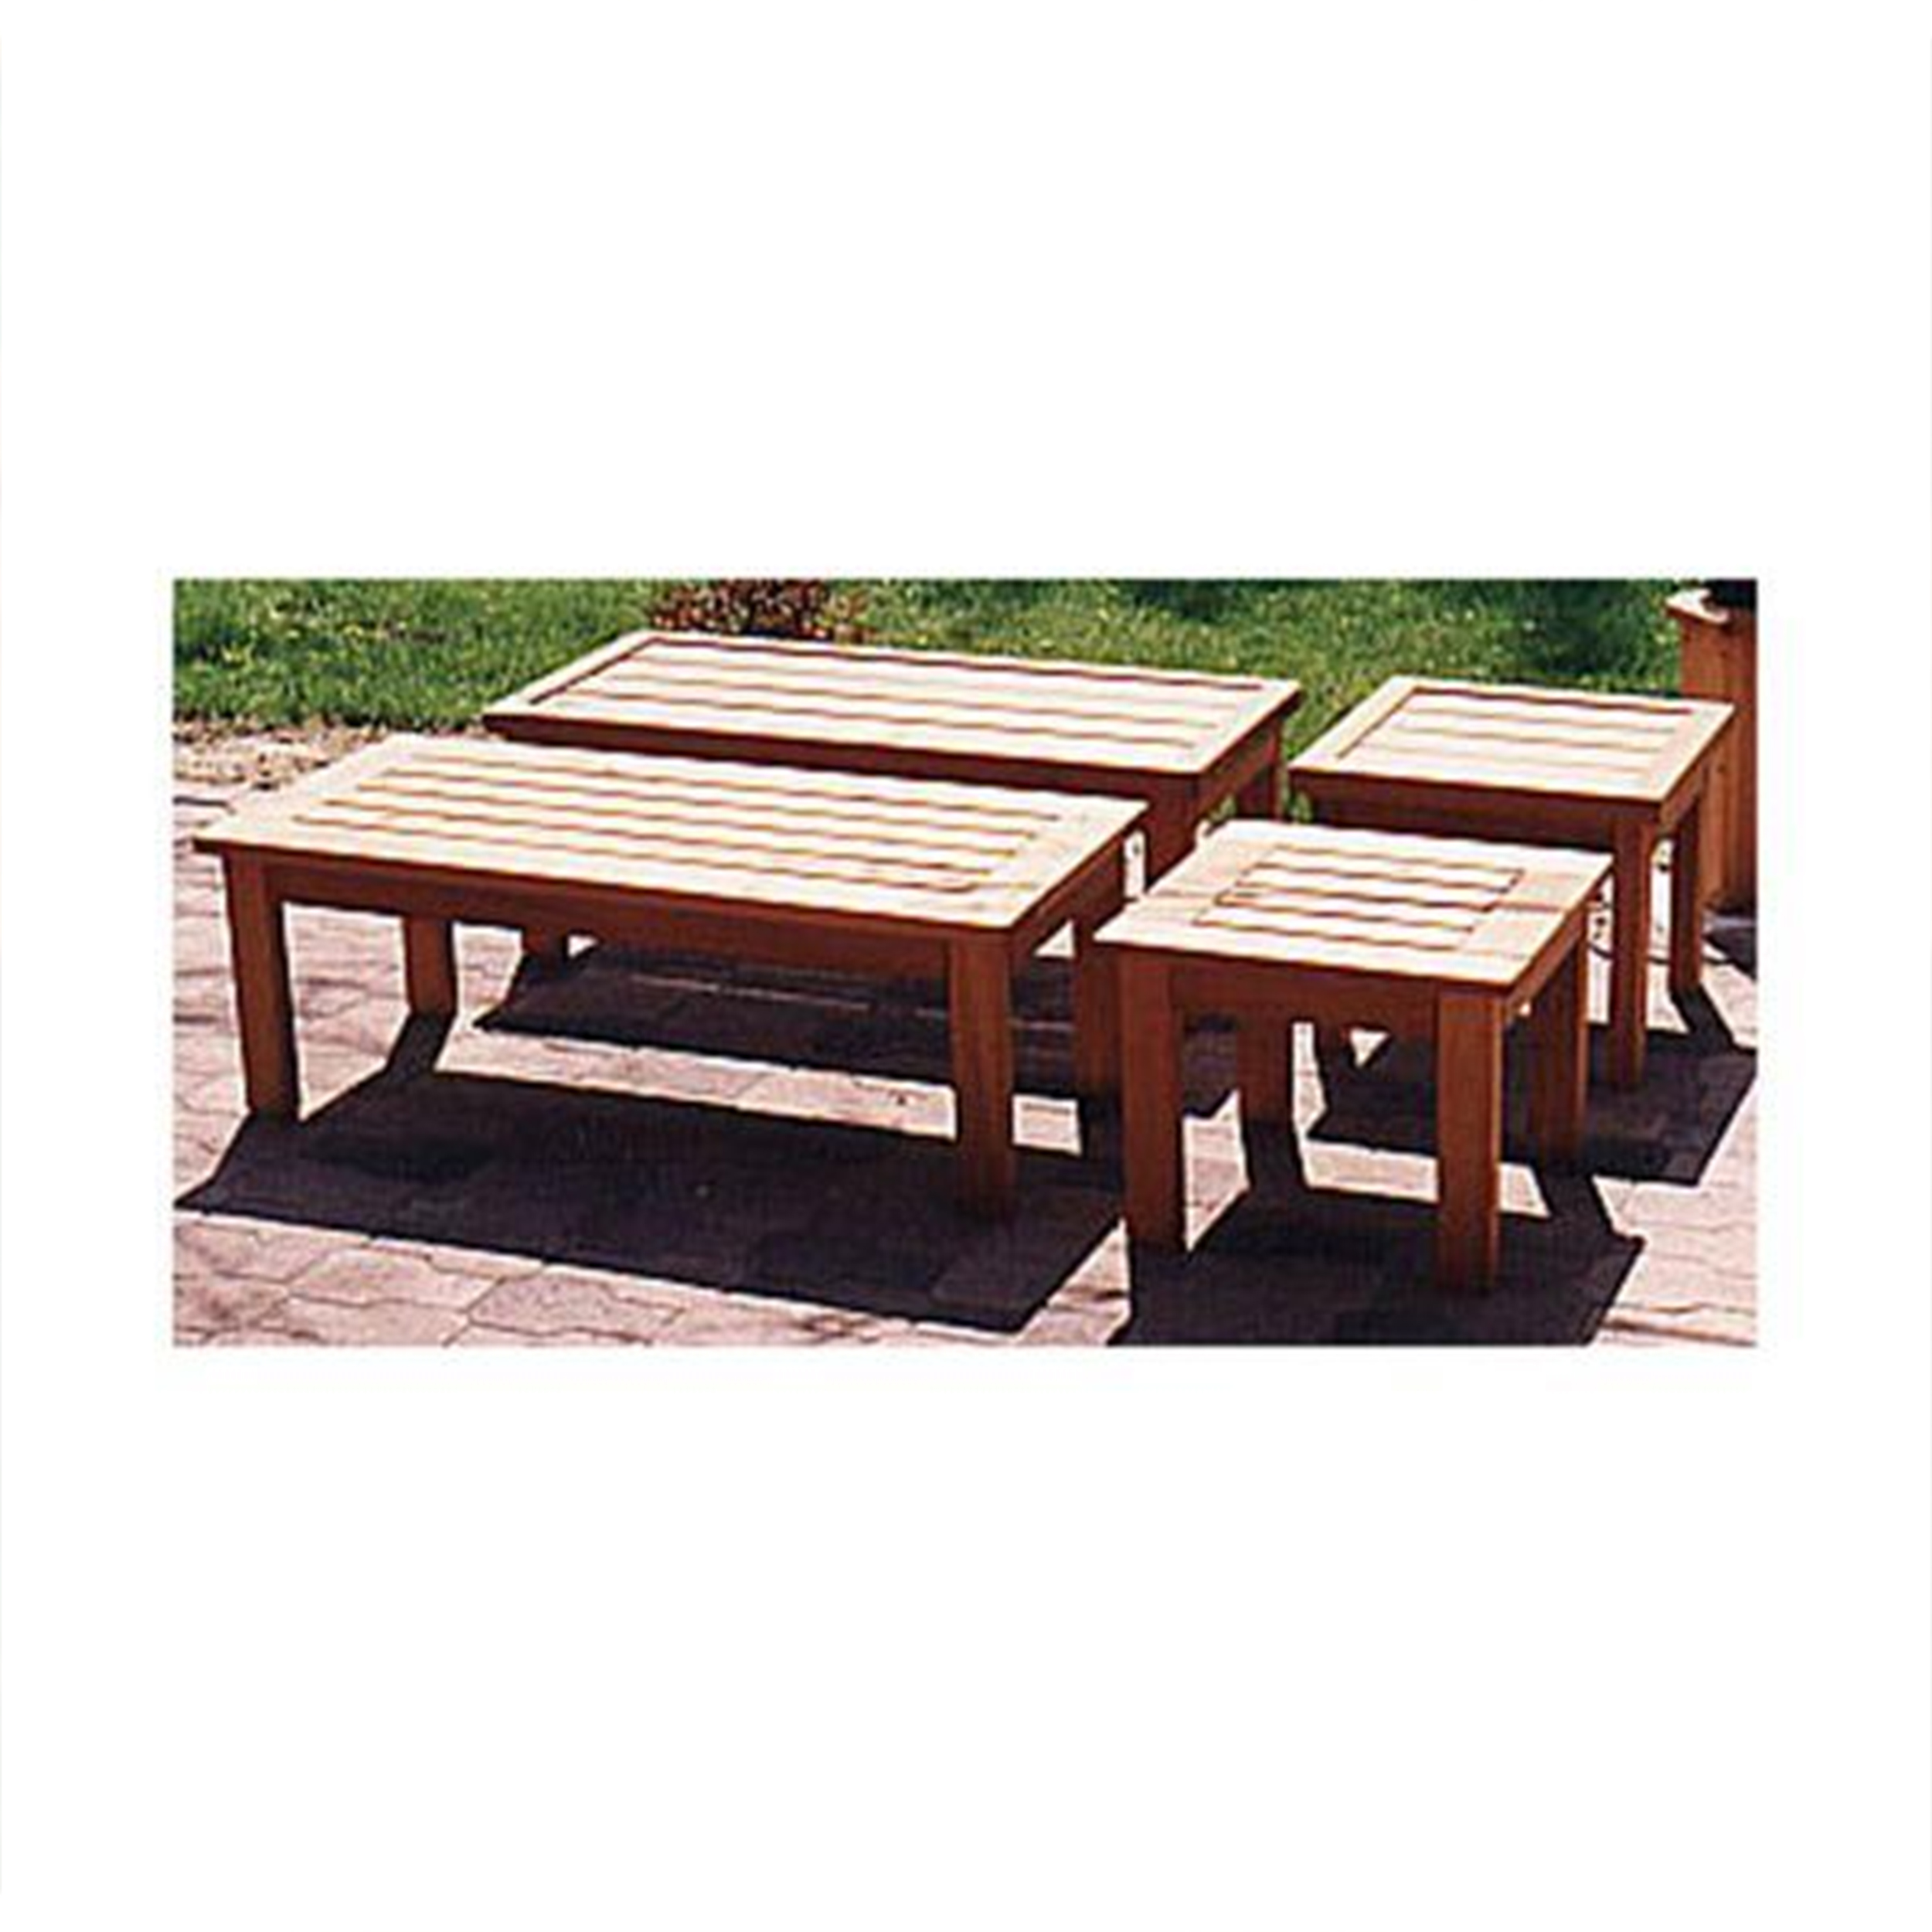 Woodworking Project Paper Plan To Build Patio Coffee Table And End Table